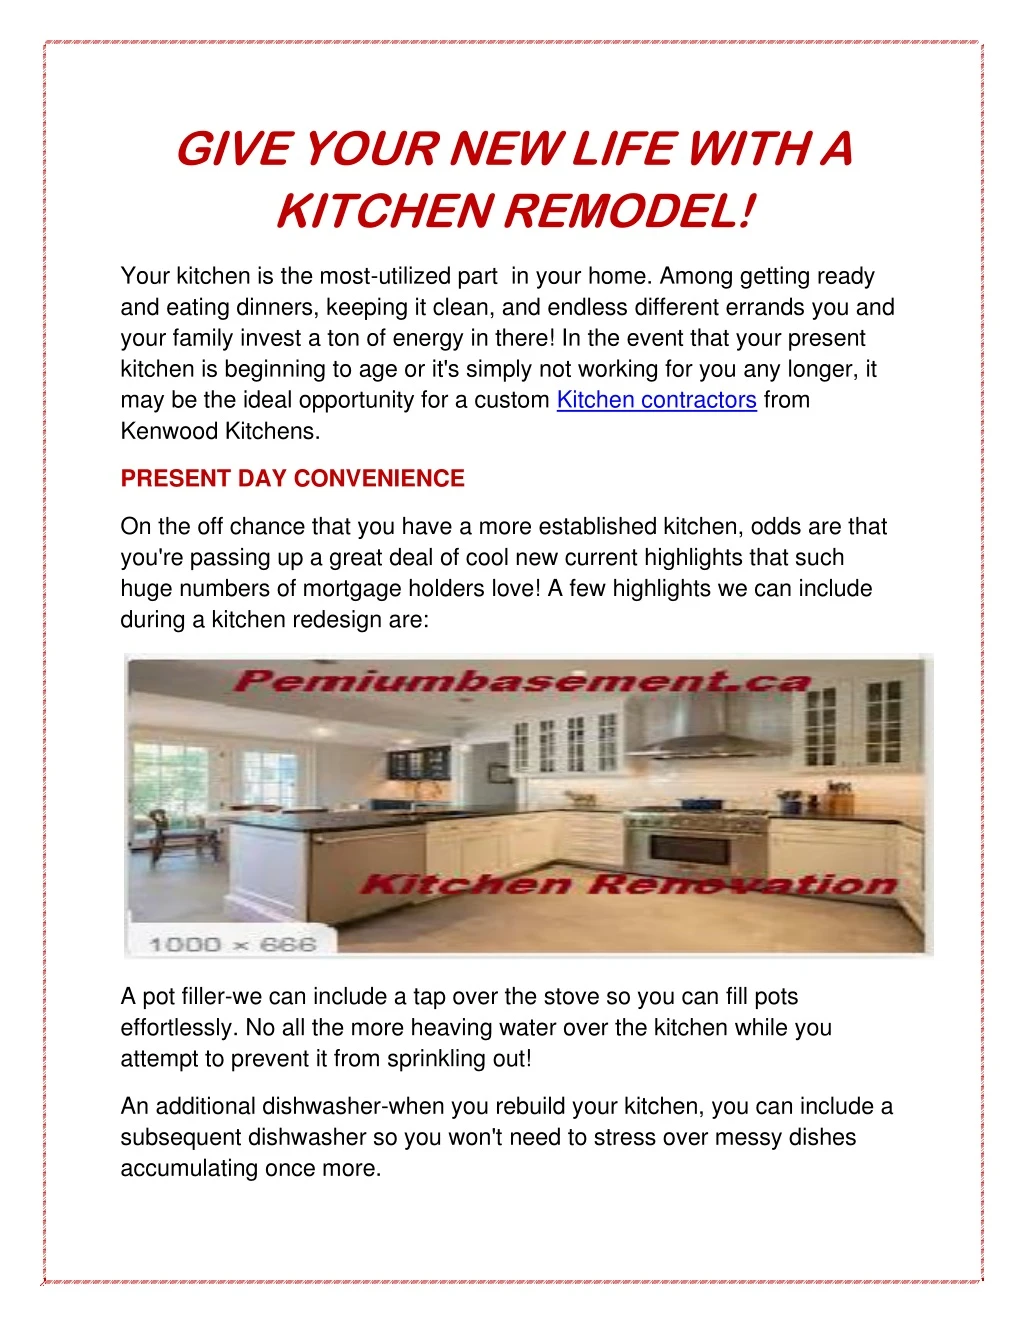 give your new life with a kitchen remodel